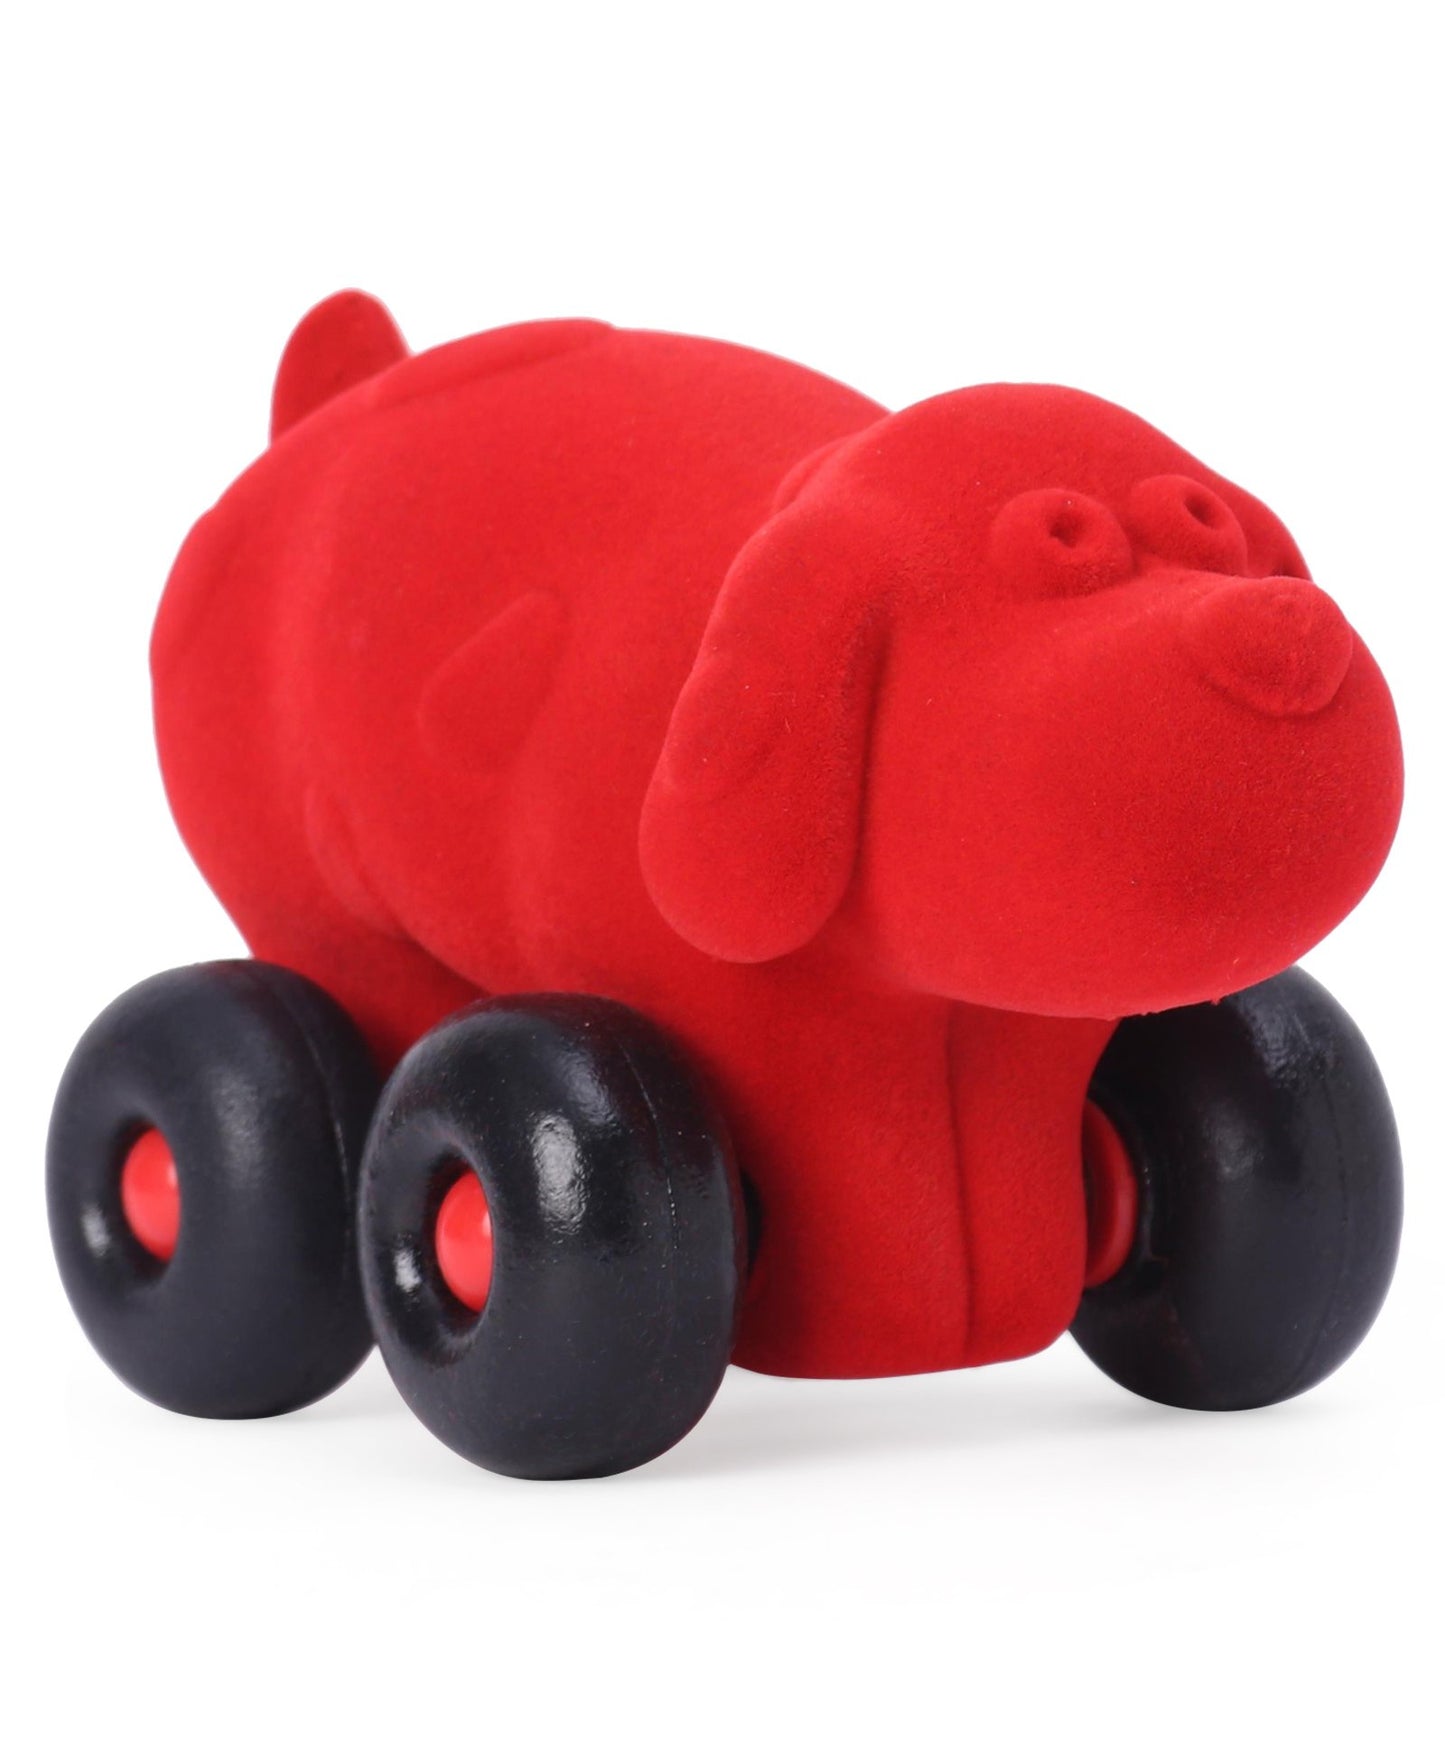 Little Animal Shaped Toy Cars - Pack of 6